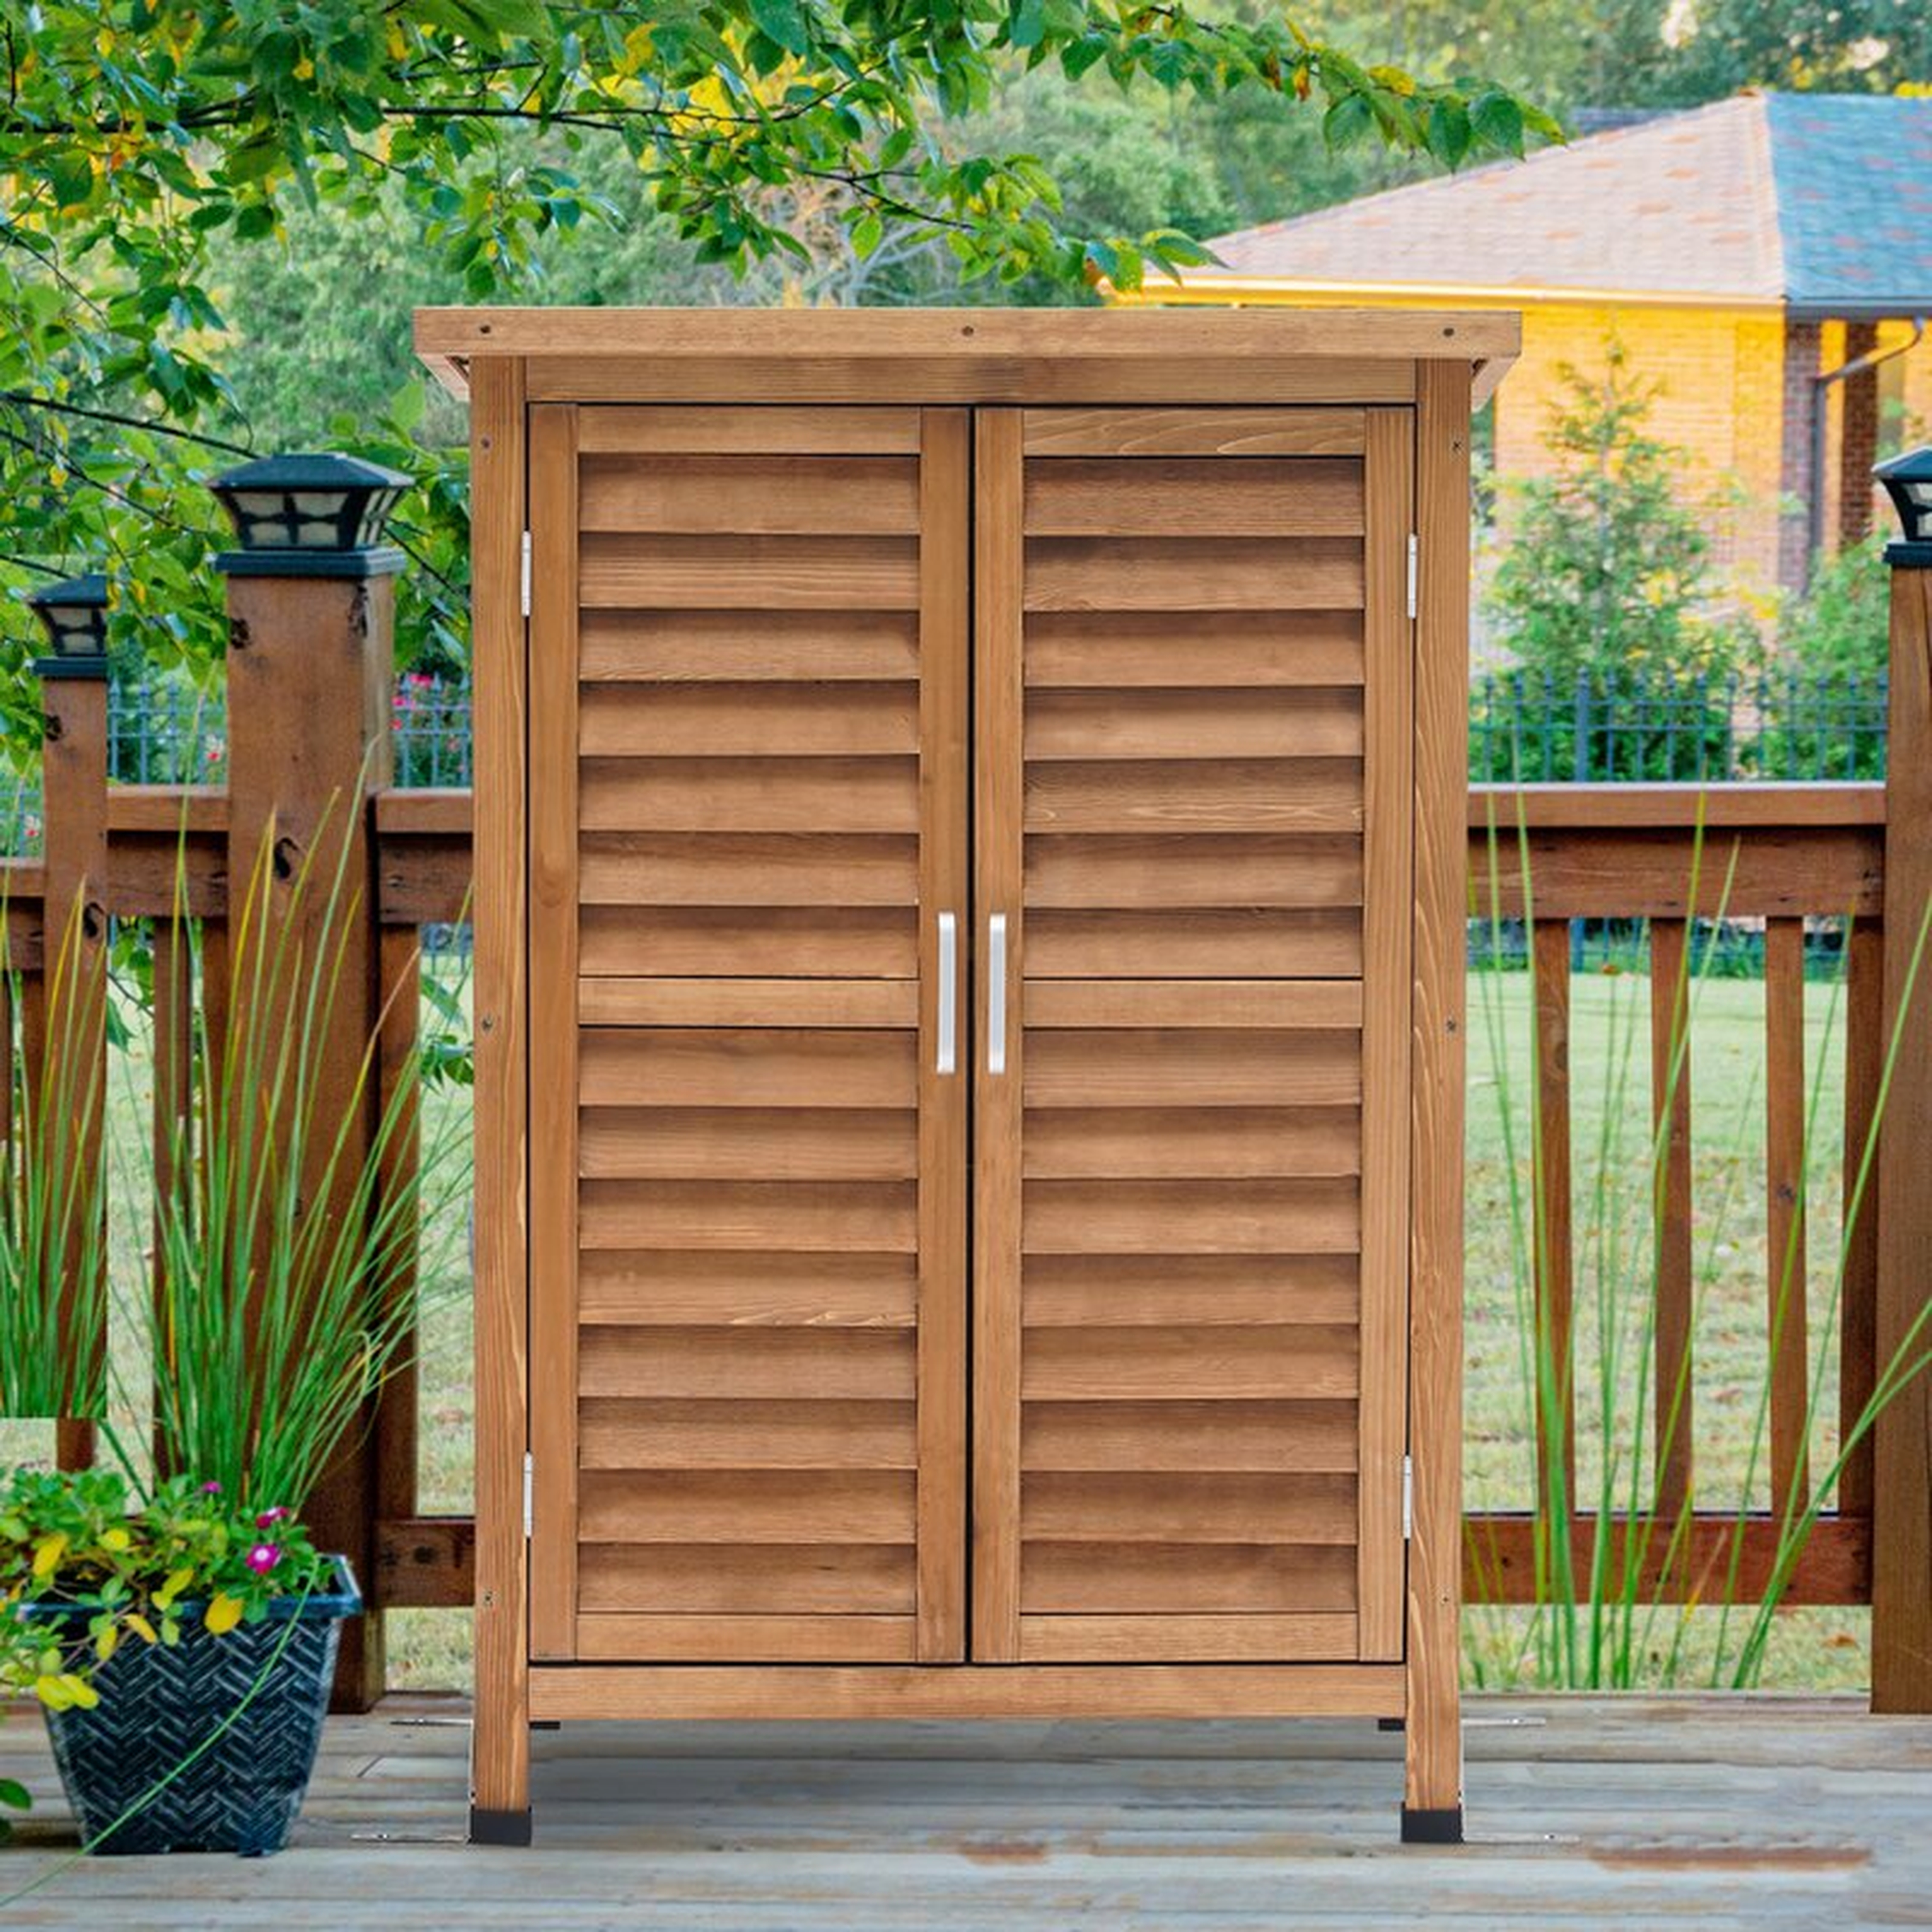 24.6" W x 18" D Solid Wood Vertical Tool Shed - Wayfair